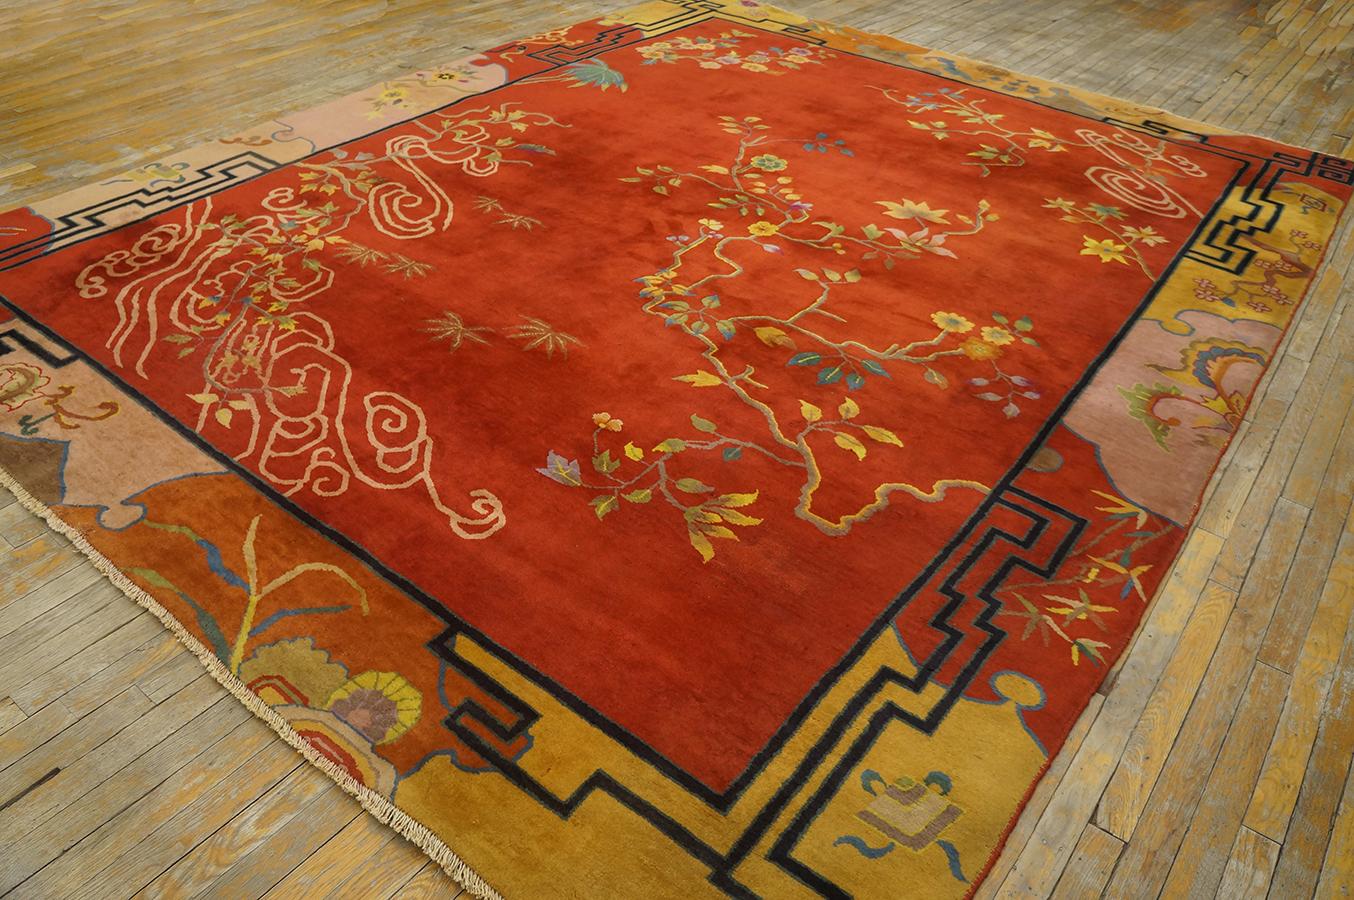 Unusual Chinese Art  Deco Carpet From 1920s measuring 9' x 11' 6